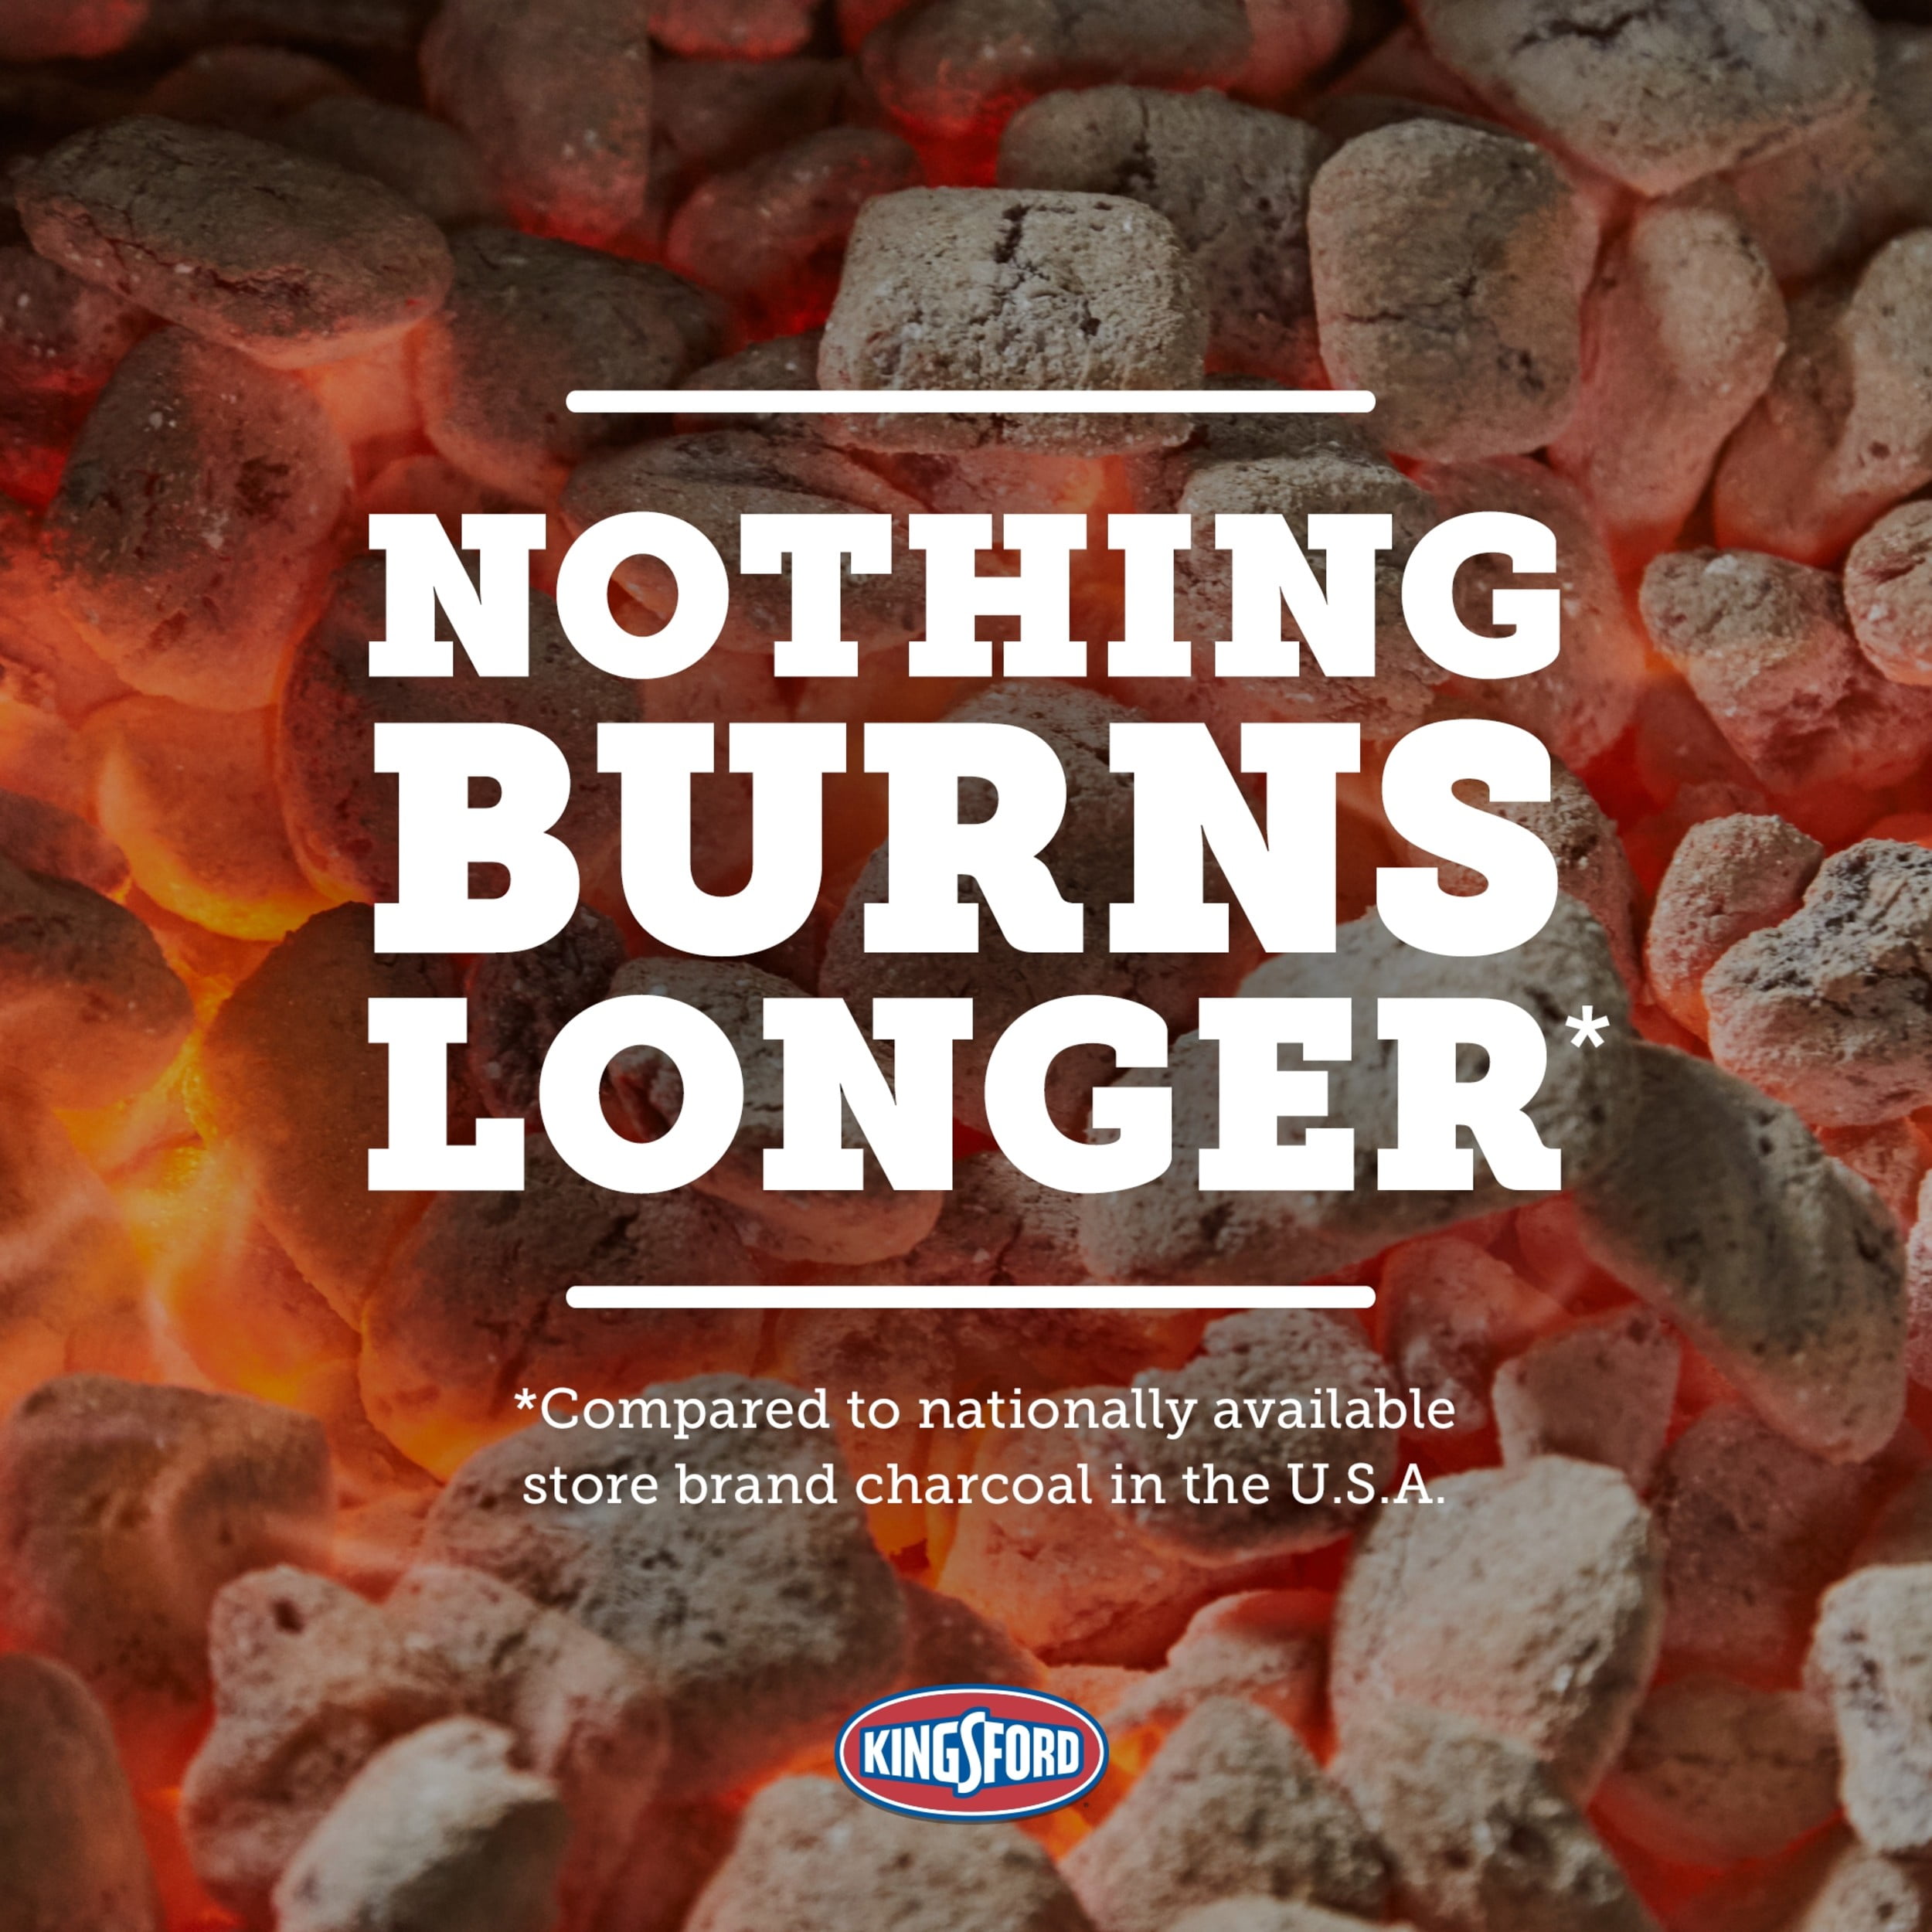 Bbq Charcoal For Grilling 18 Pounds... Kingsford Original Charcoal Briquettes